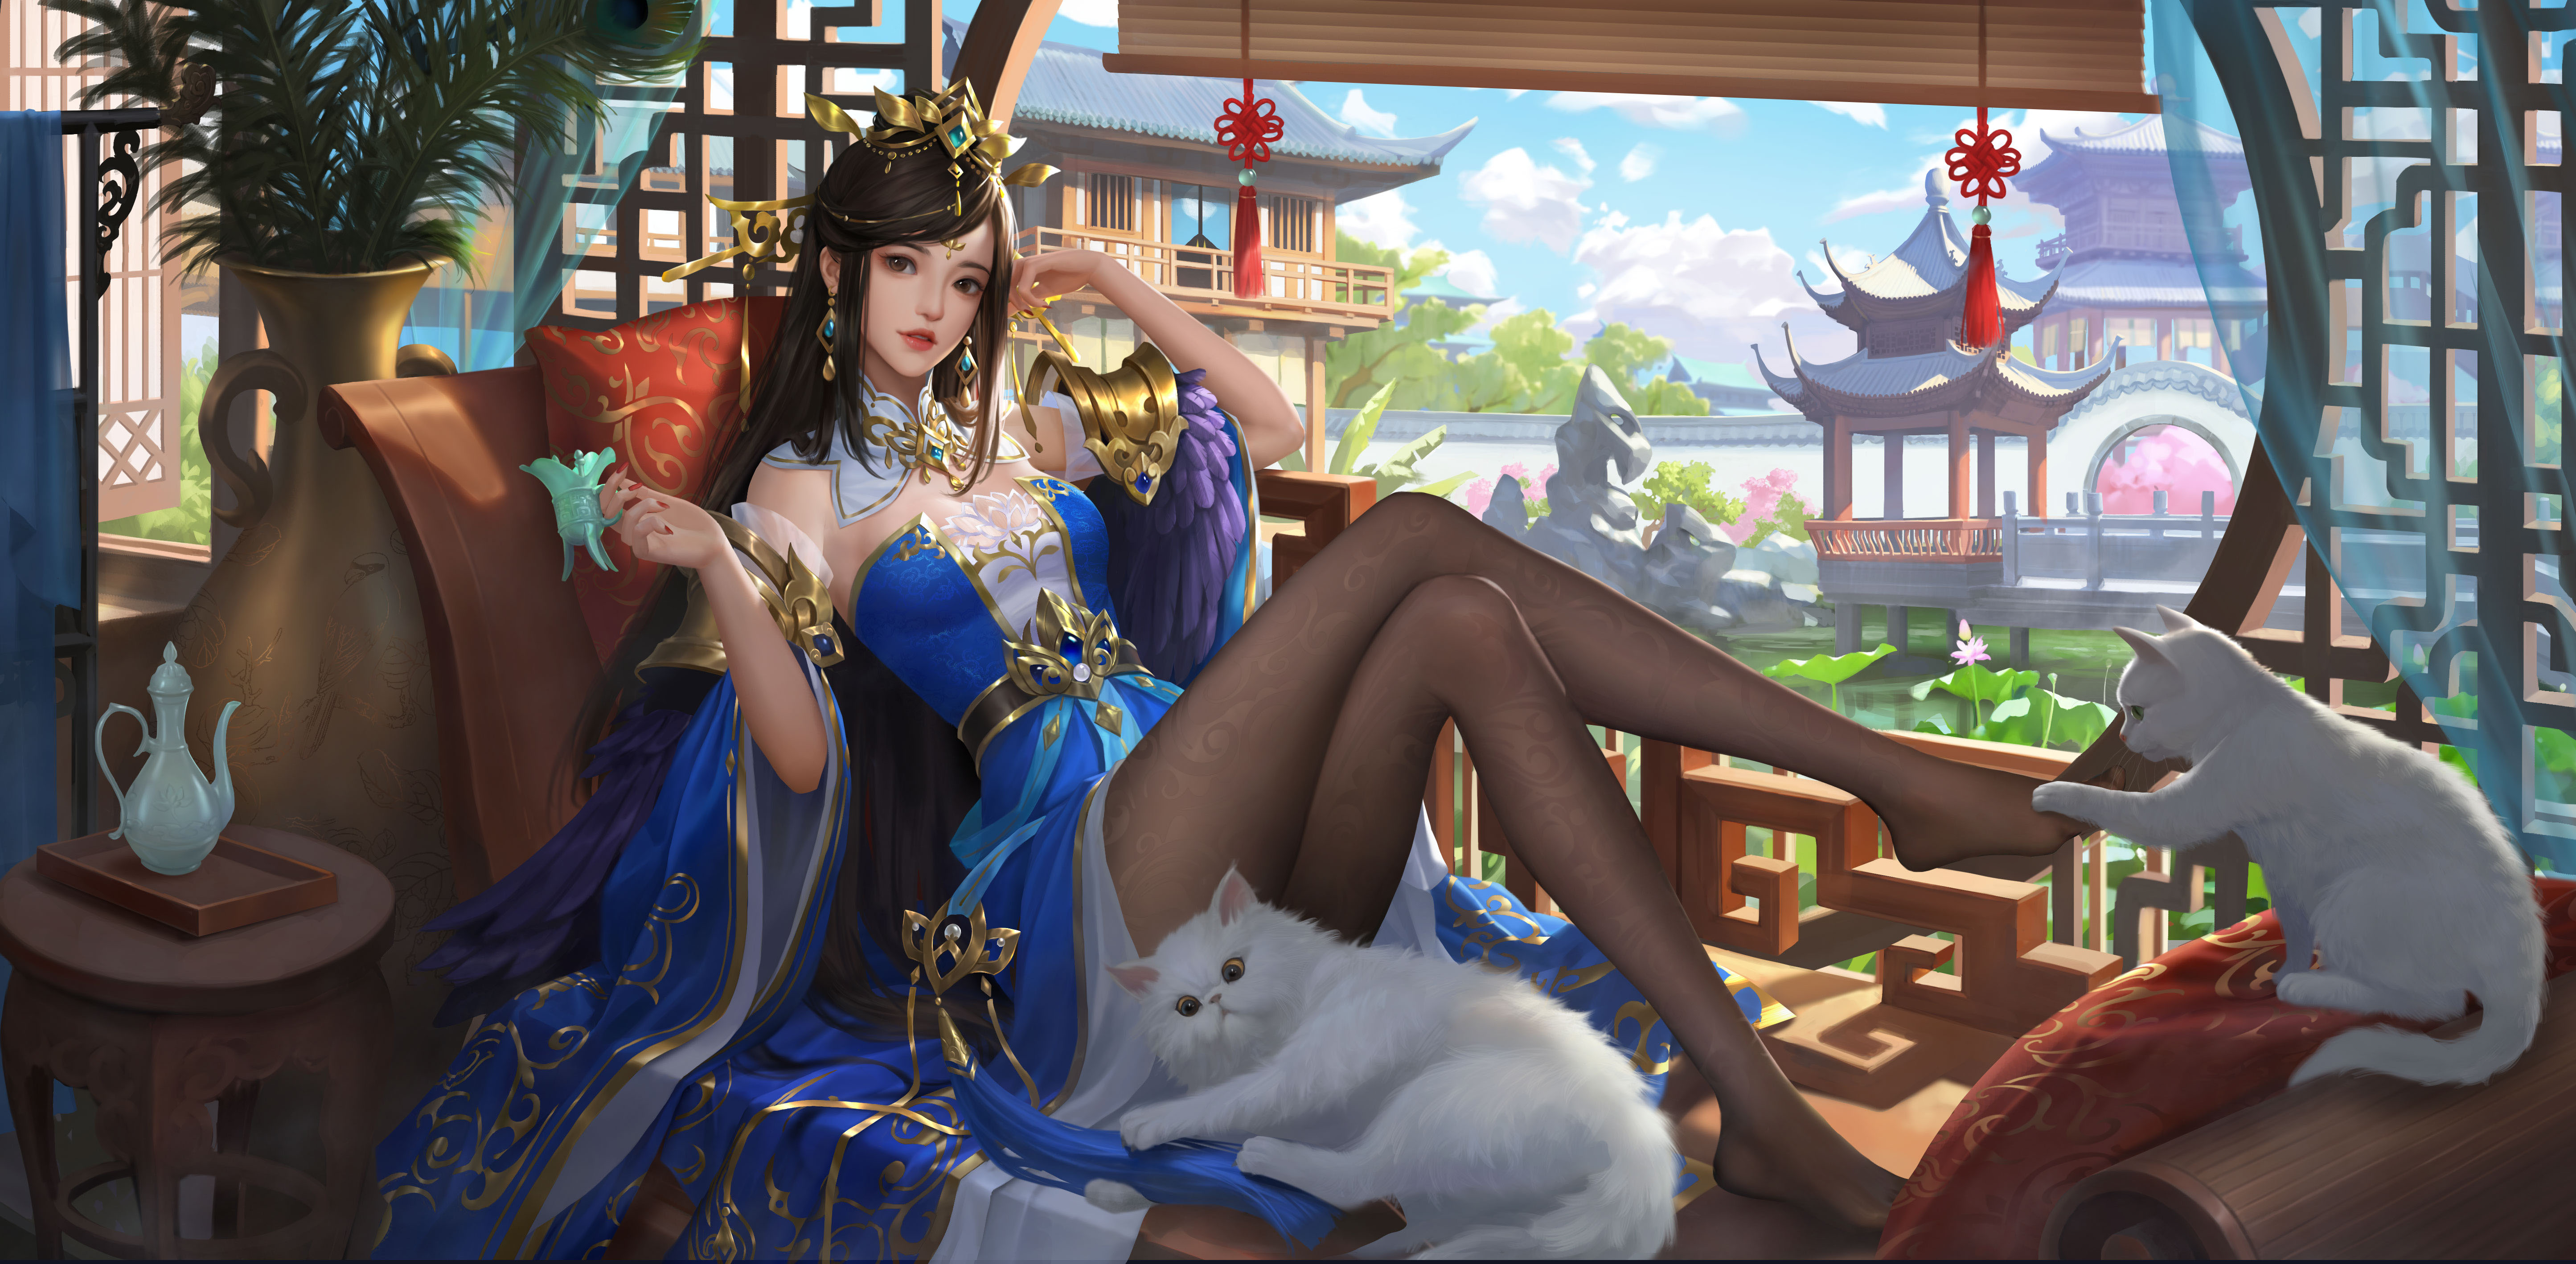 Video Game Characters Three Kingdoms Video Games Video Game Art Video Game Girls Legs Crossed Cats A 5780x2837